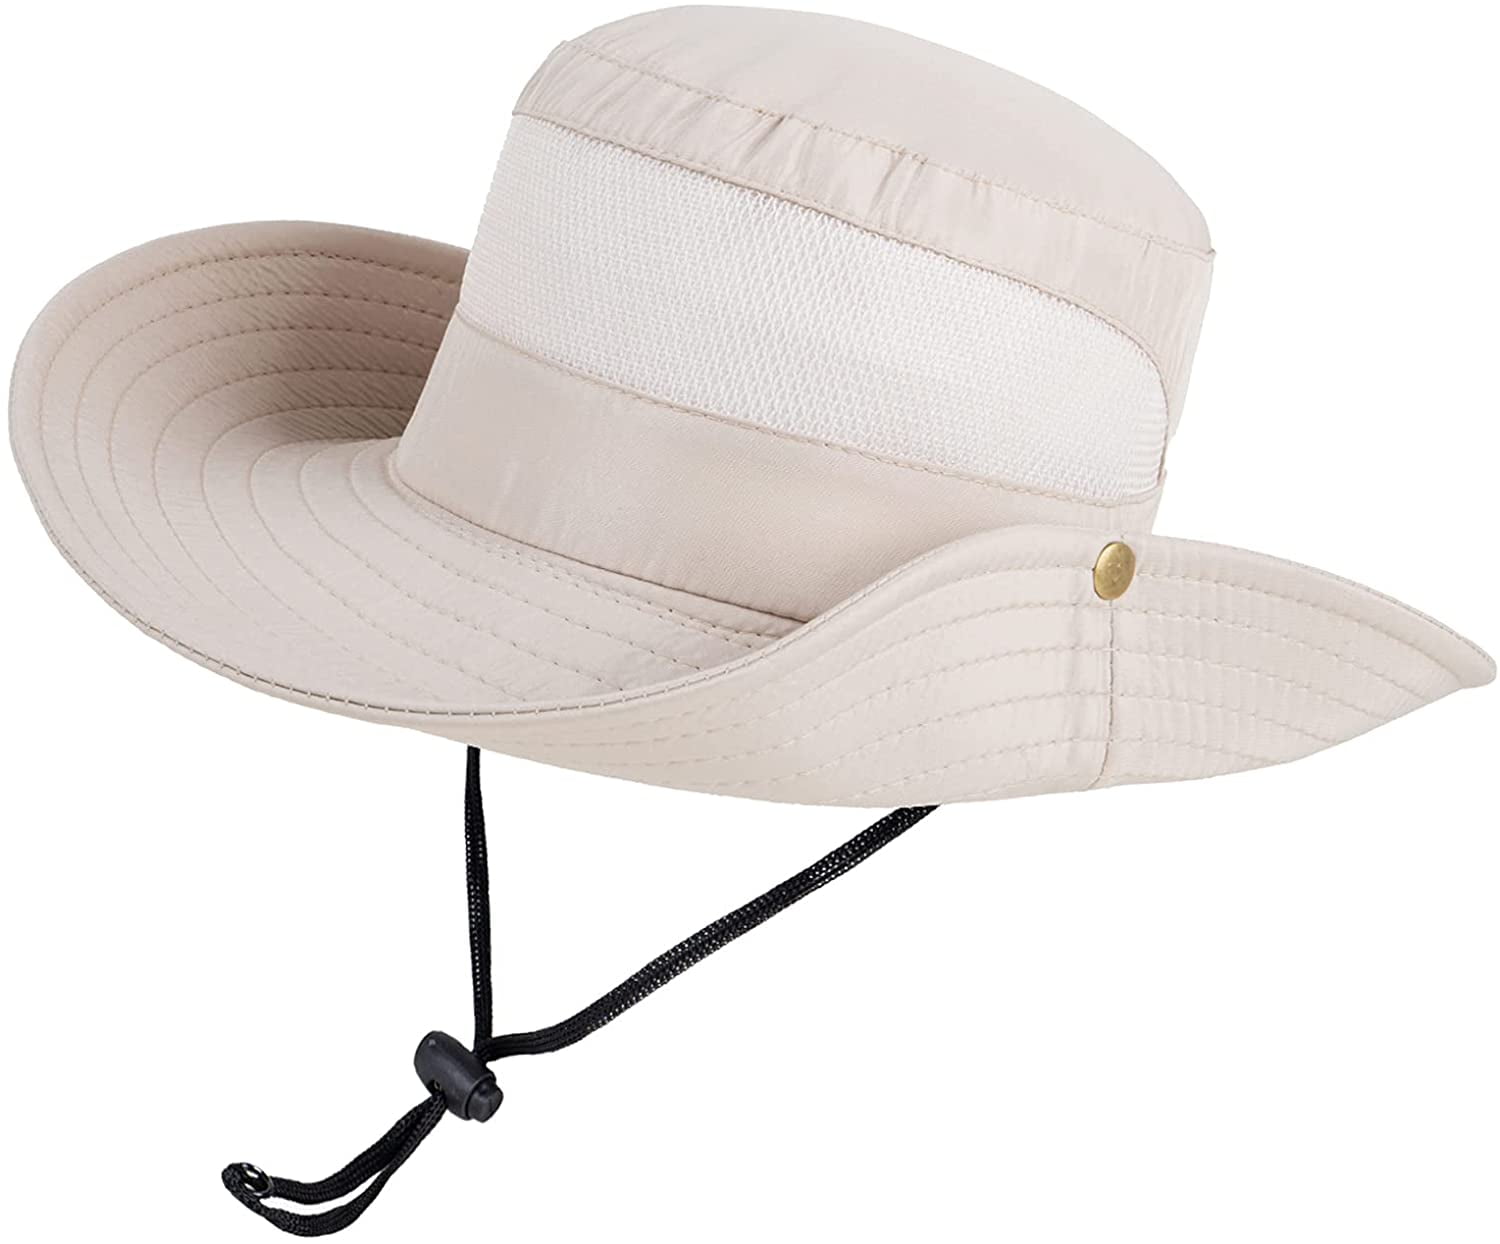 VONTER Fishing Hat and Safari Cap with Sun Protection Unisex Wide 